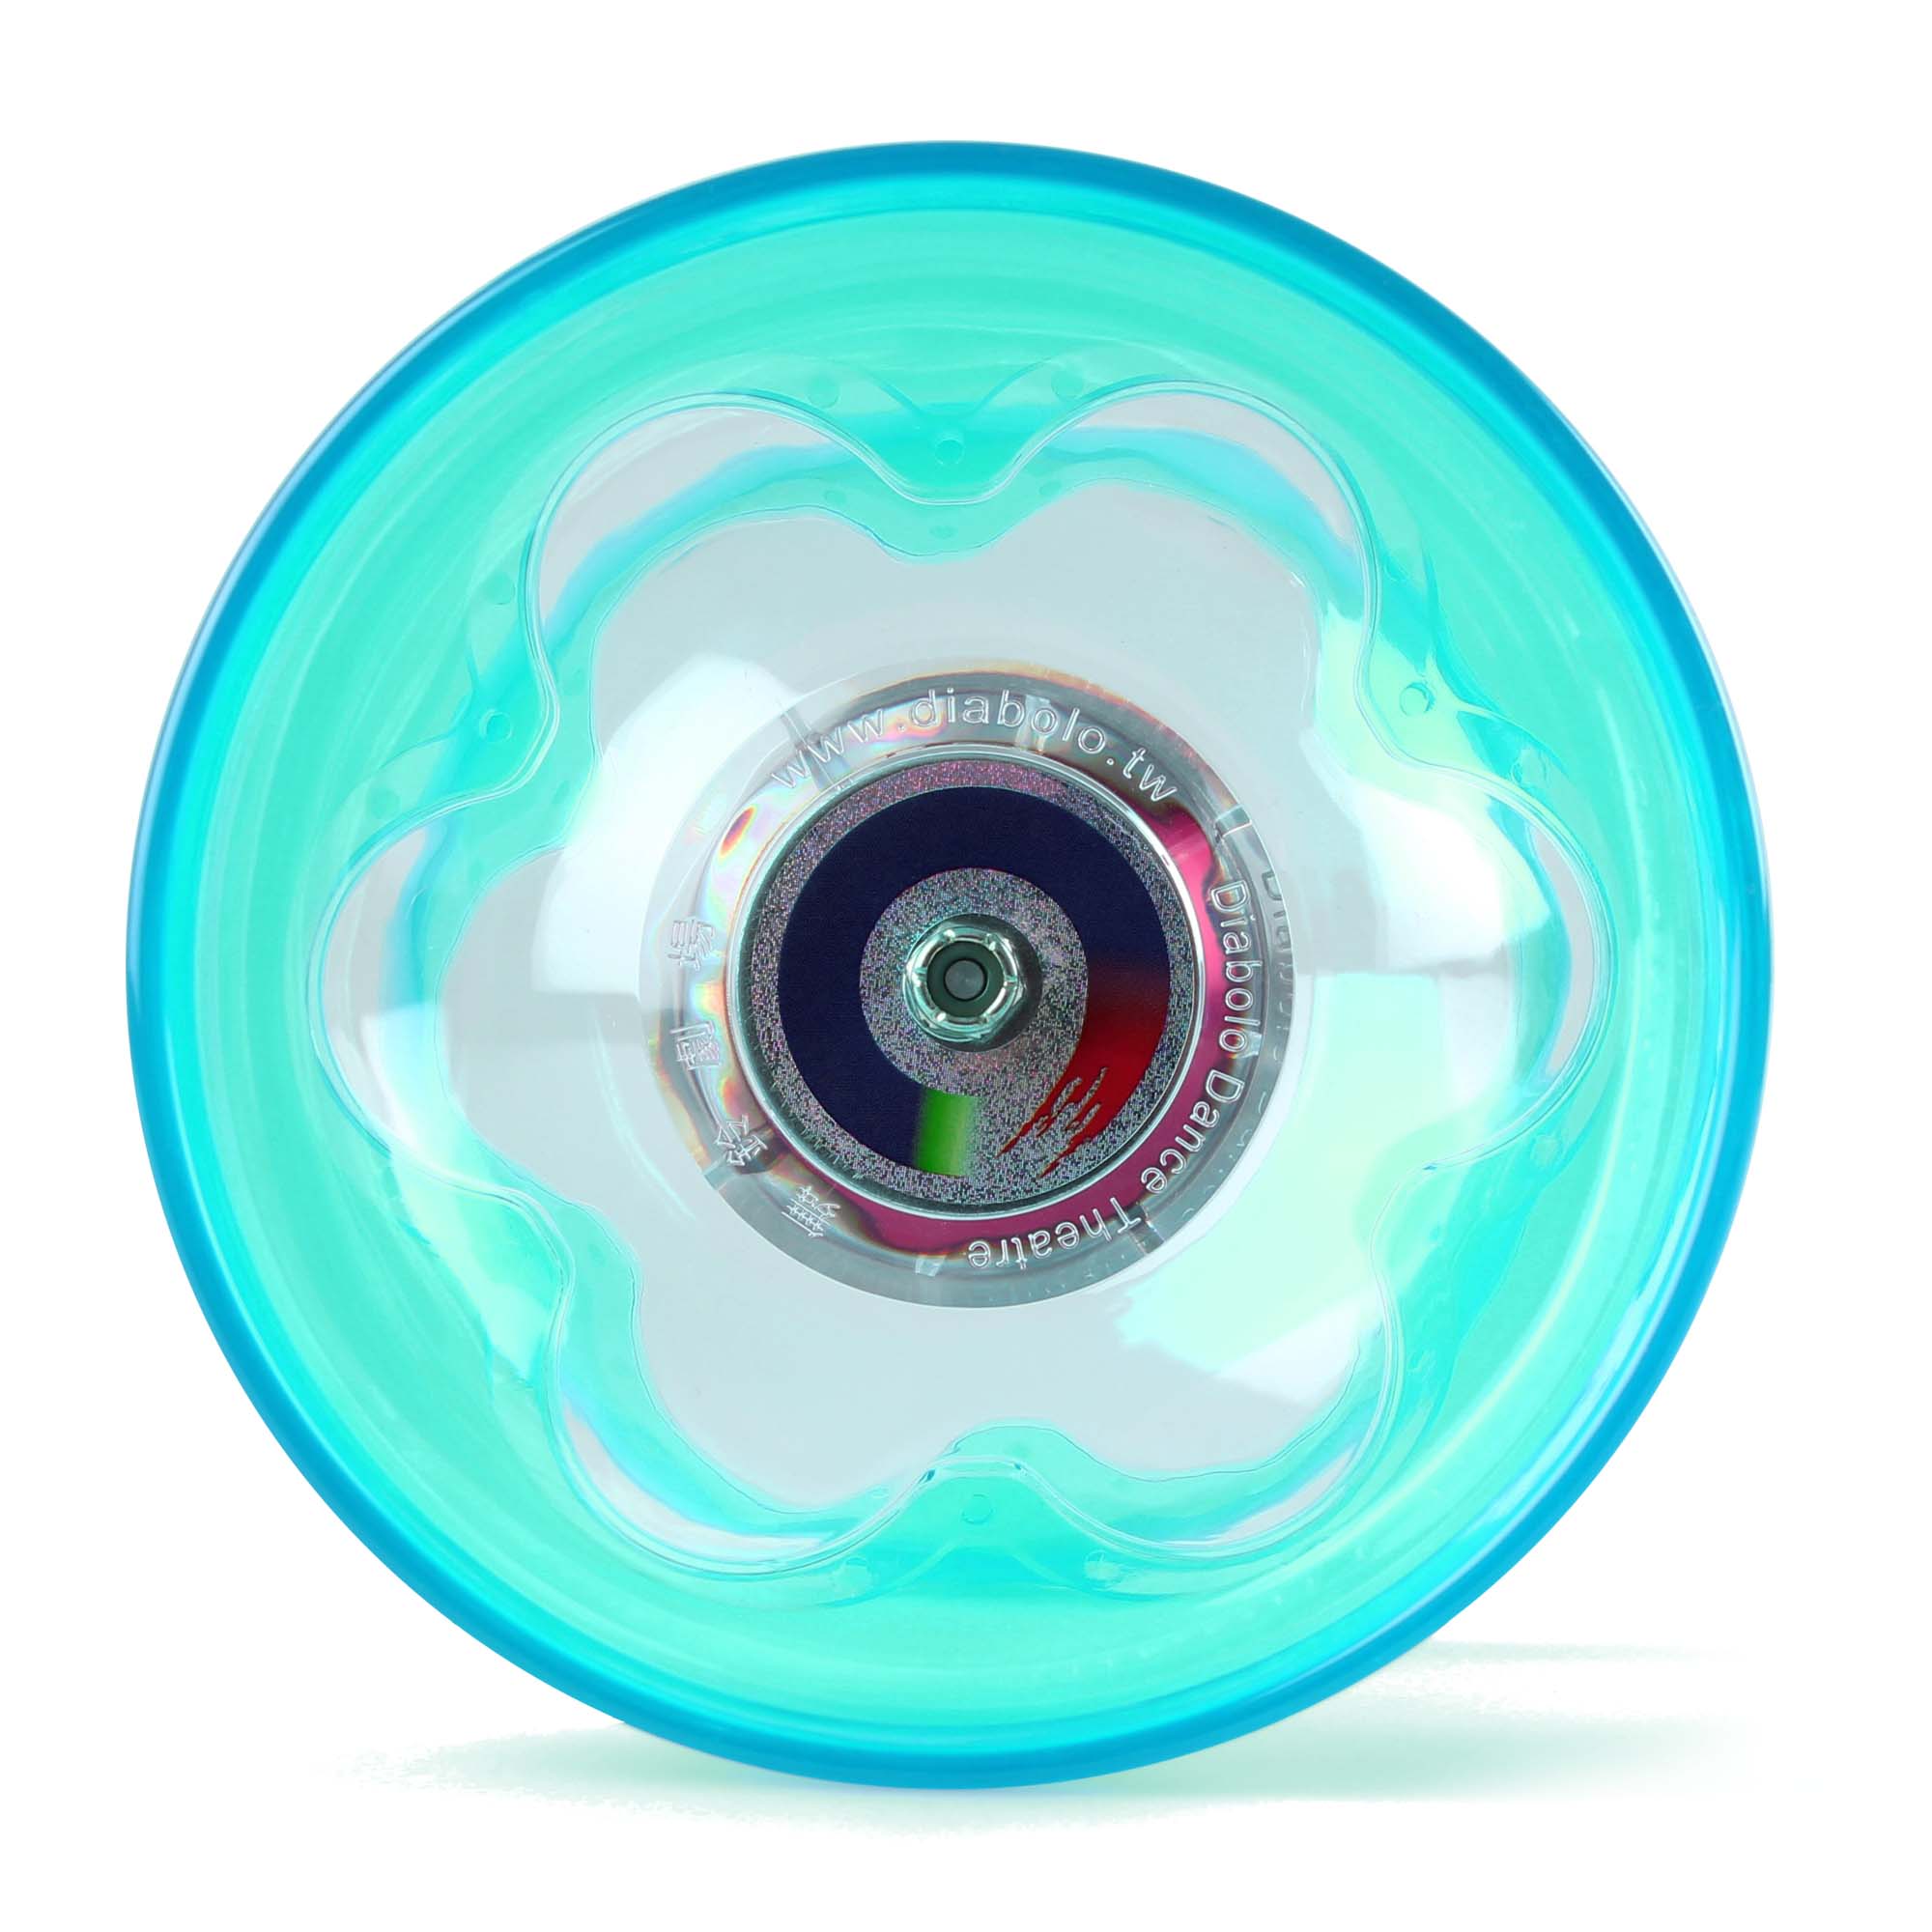 Top view of Turquoise hyperspin diabolo